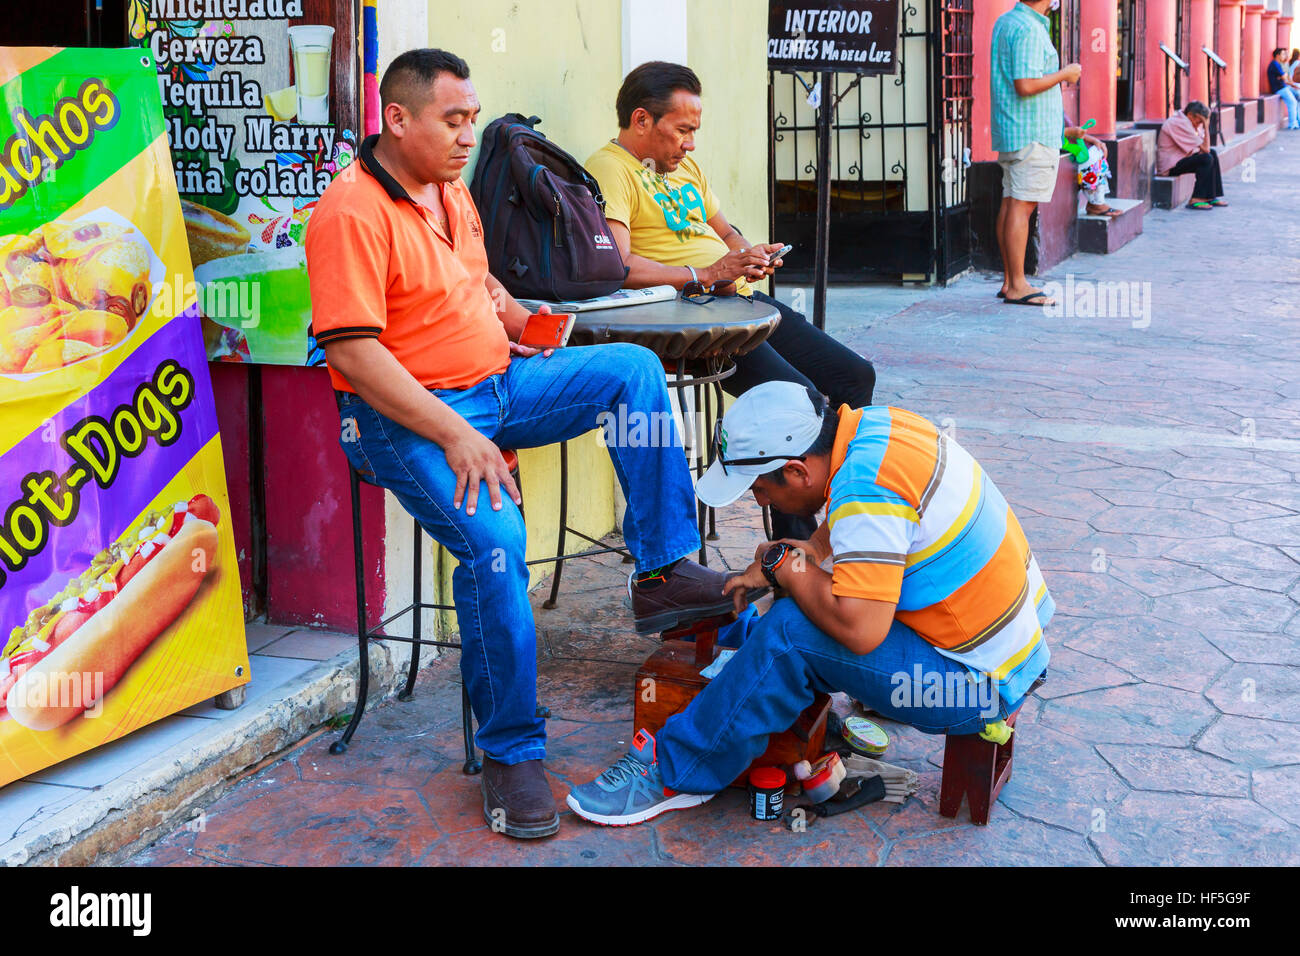 Shoeshine man working outside the shops in the main square at Valladolid, Yucatan, Mexico Stock Photo